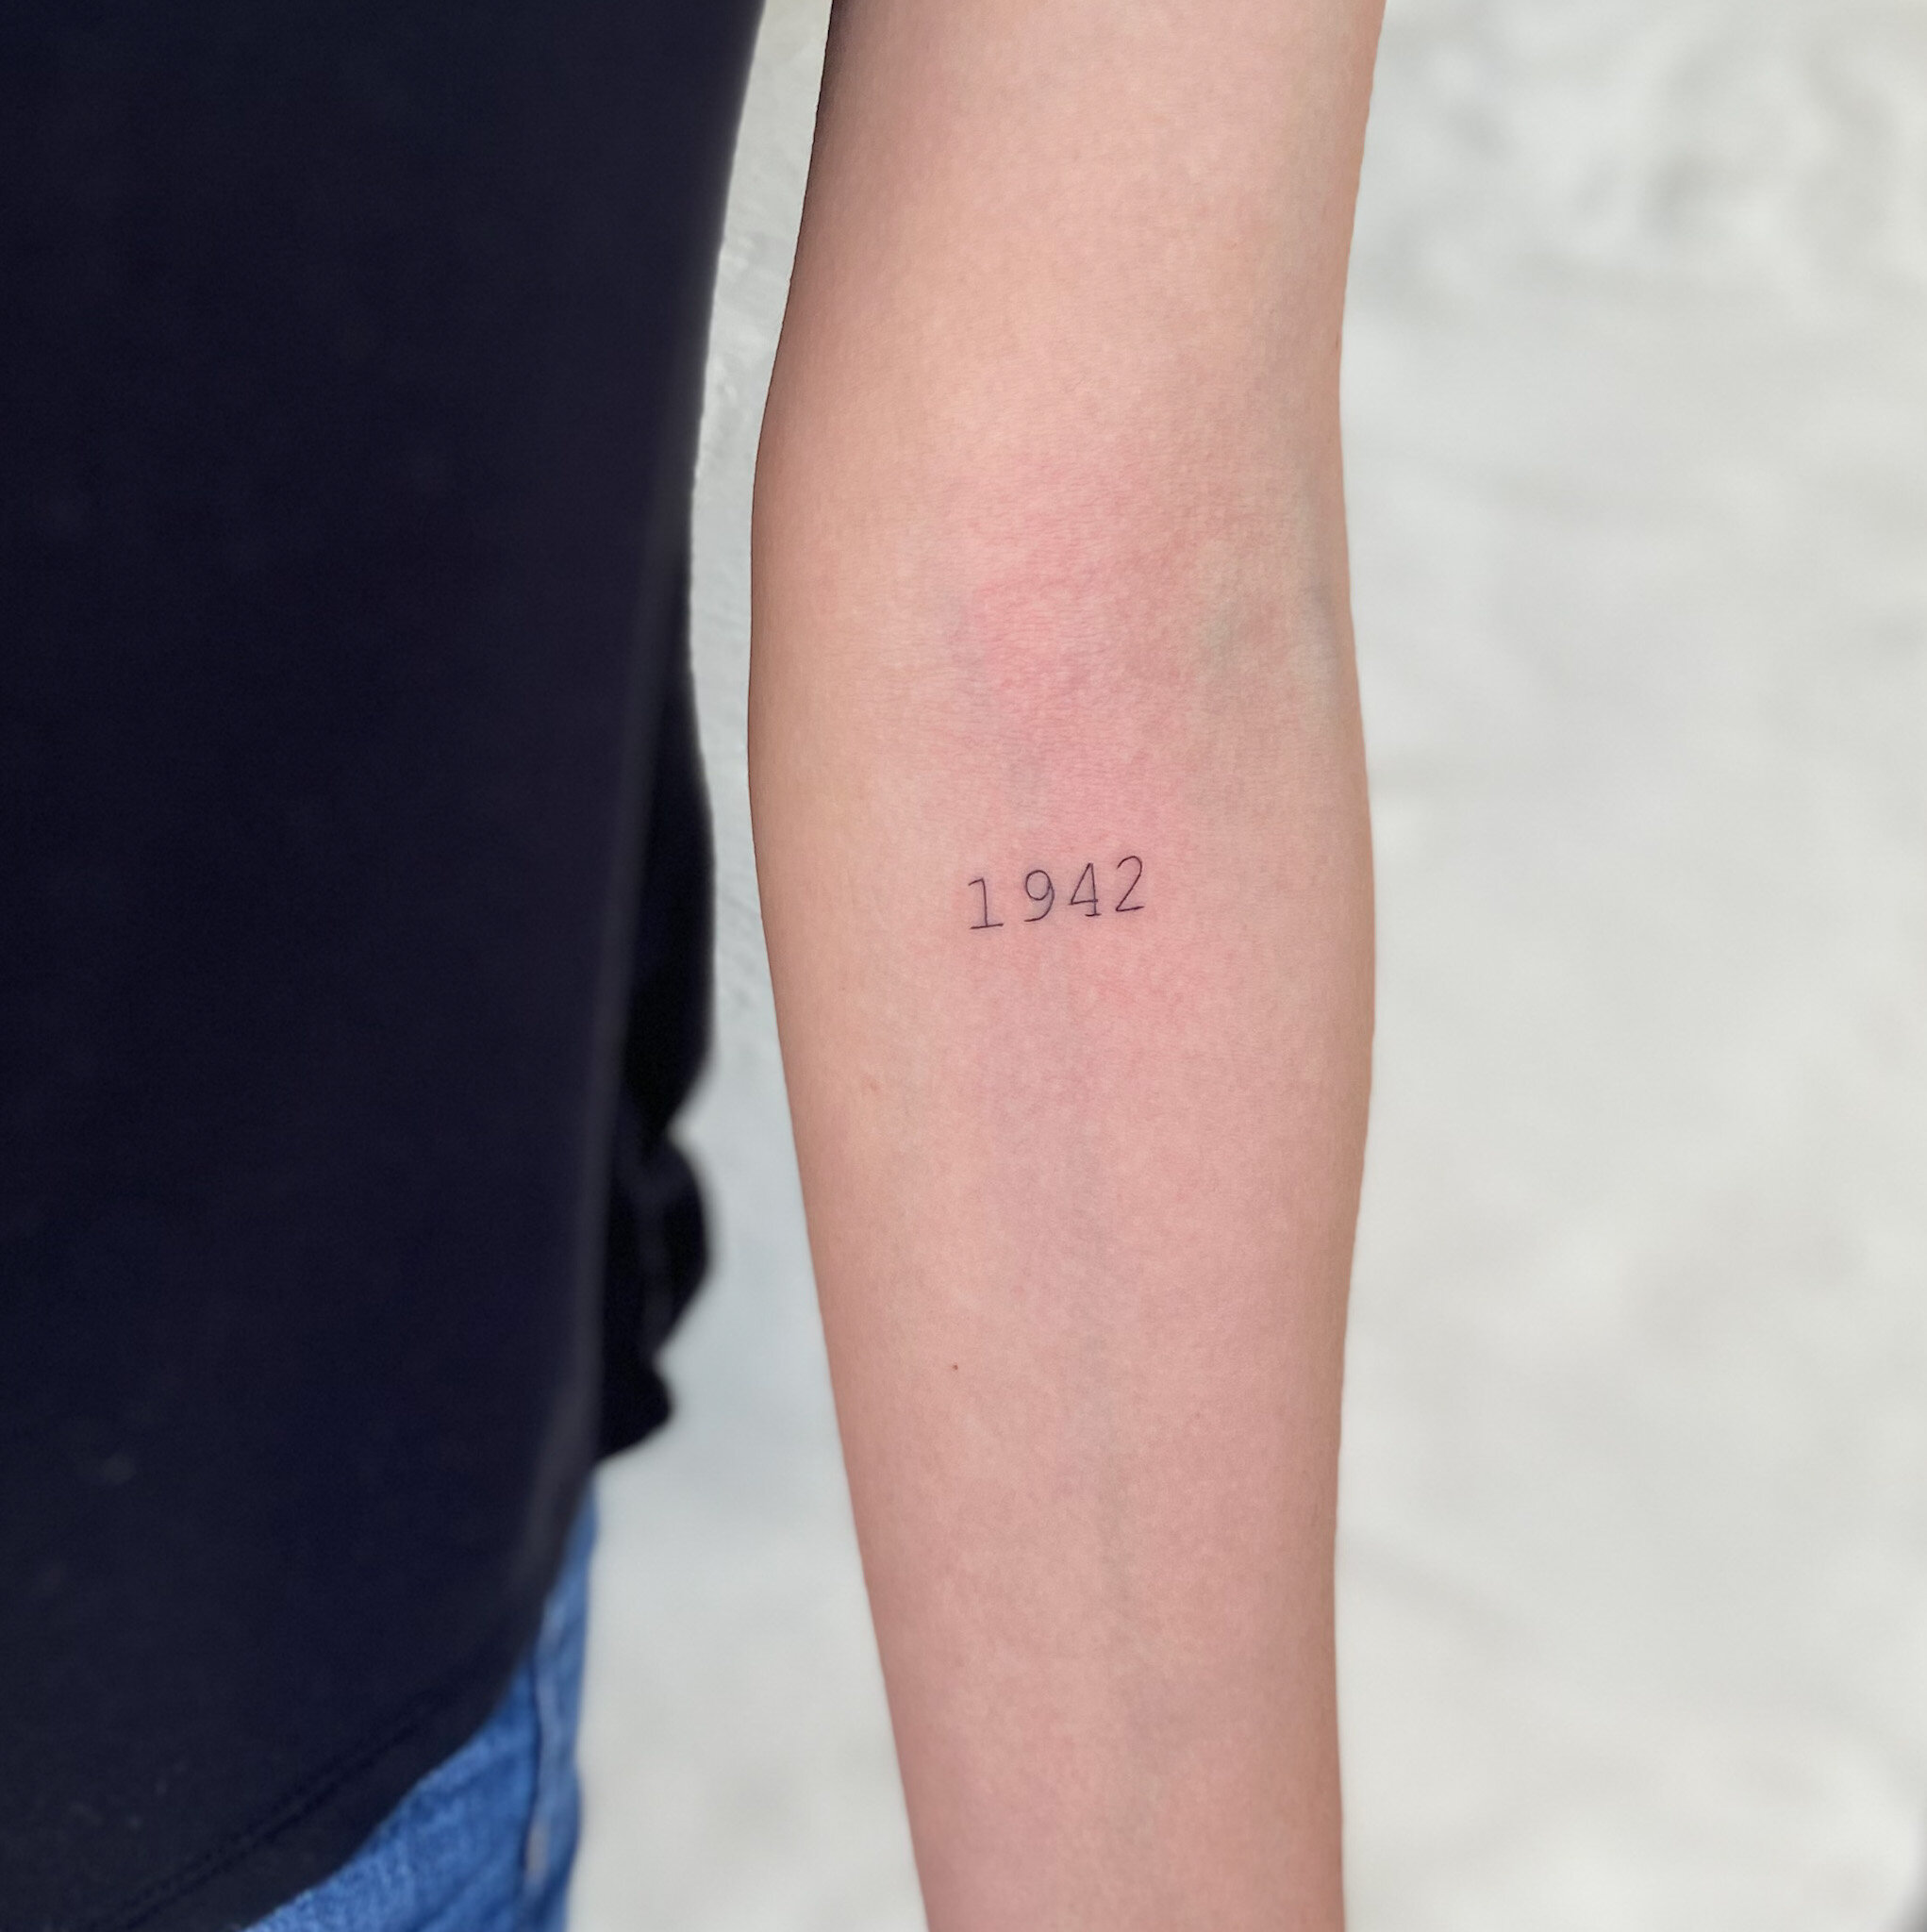 1942 tattoo meaning